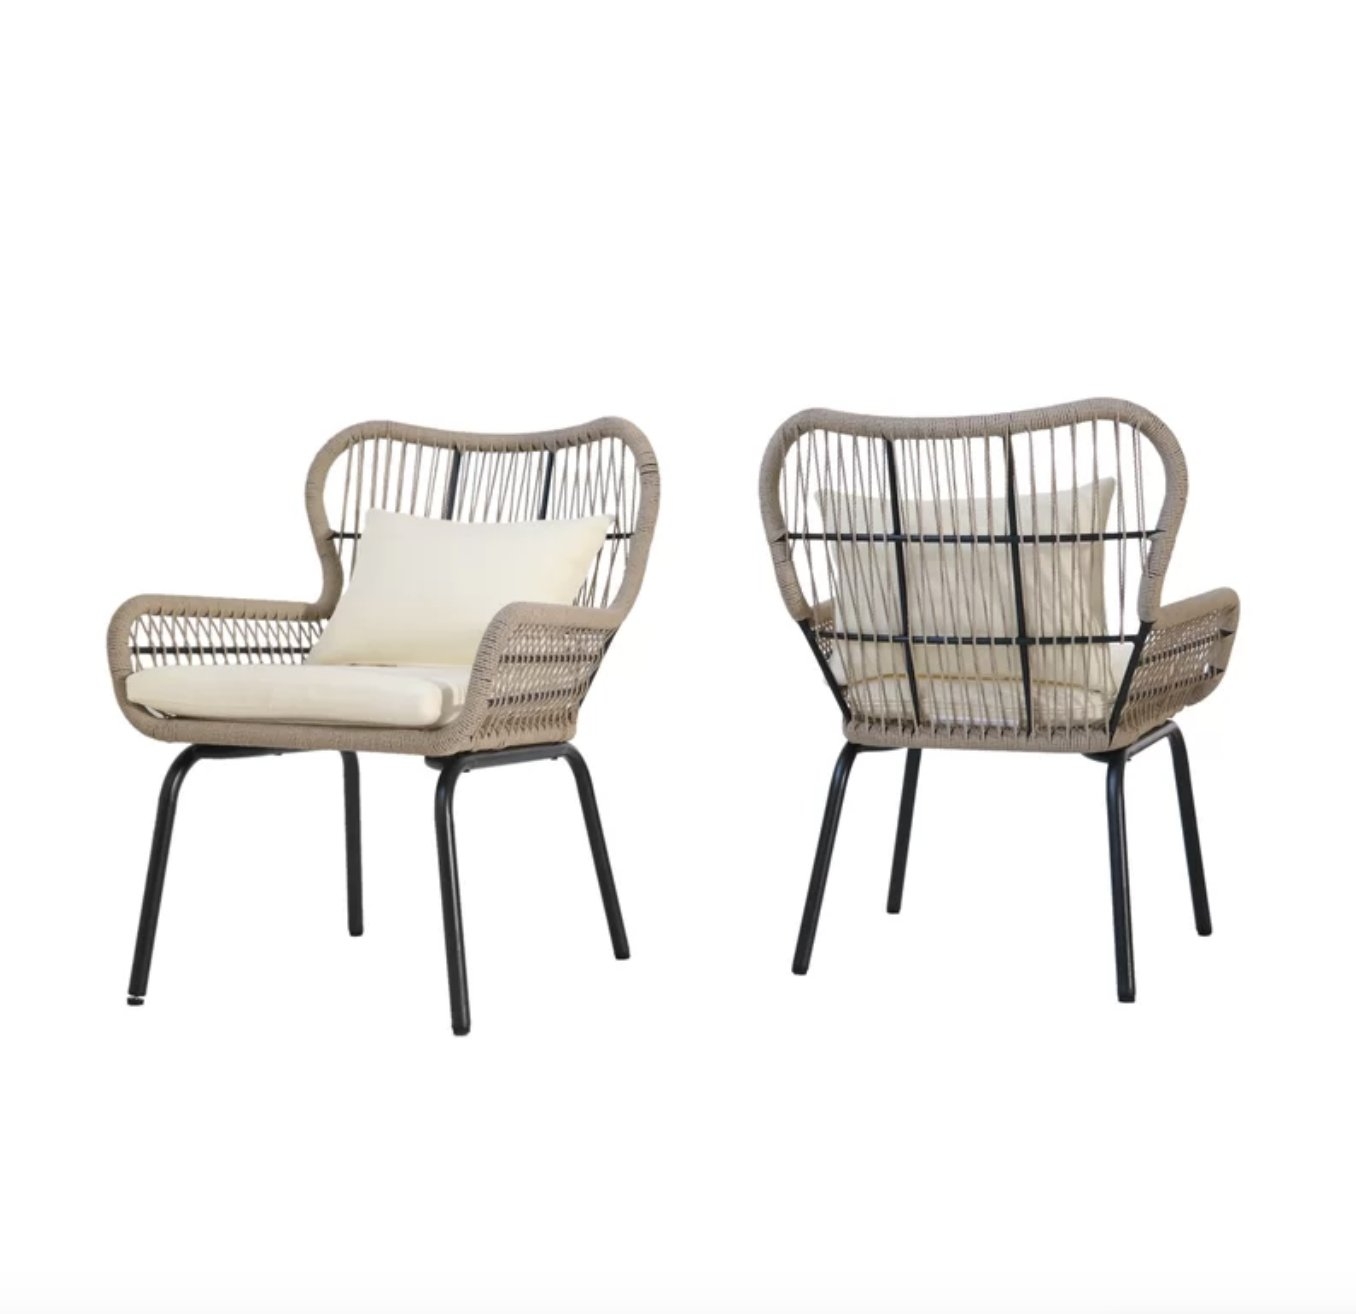 Chesson Club Chair - Set of 2 - Image 0